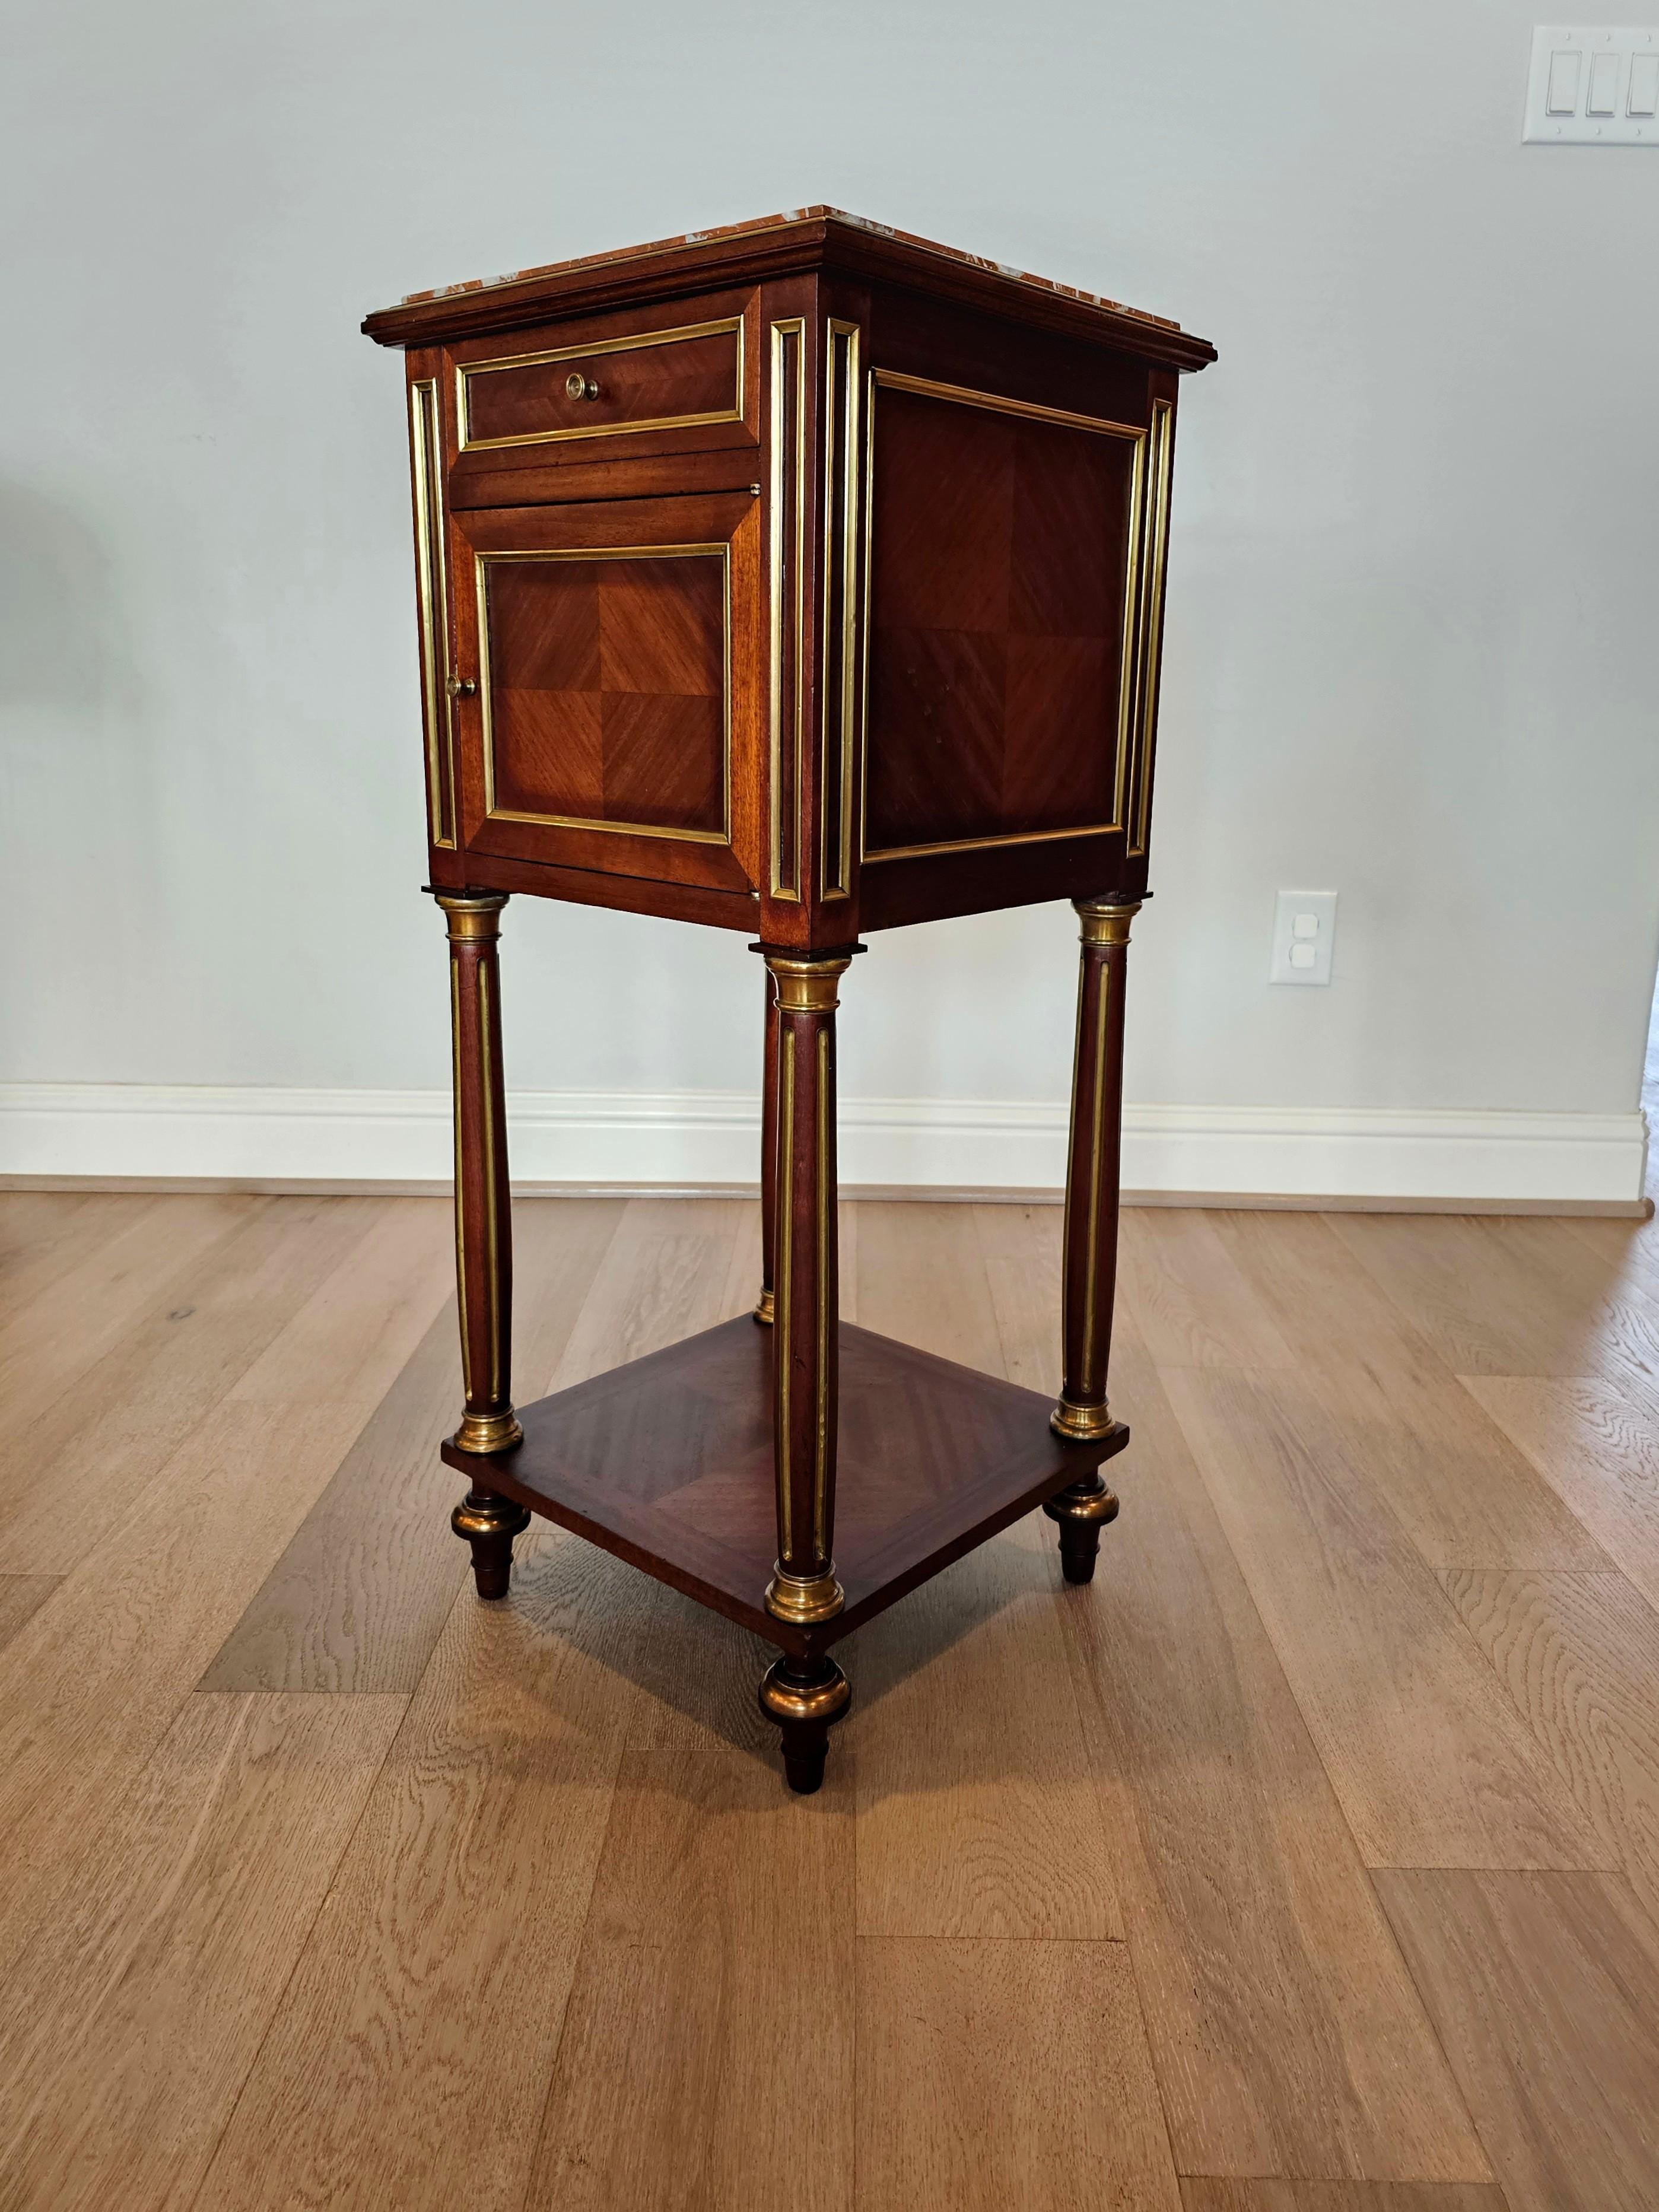 A fine quality antique French Parisian marble-top mahogany bedside cabinet, circa 1890.

Exquisitely hand-crafted in France in the late 19th century, exceptionally executed in refined luxurious Louis XVI taste, having a rouge marble top framed by